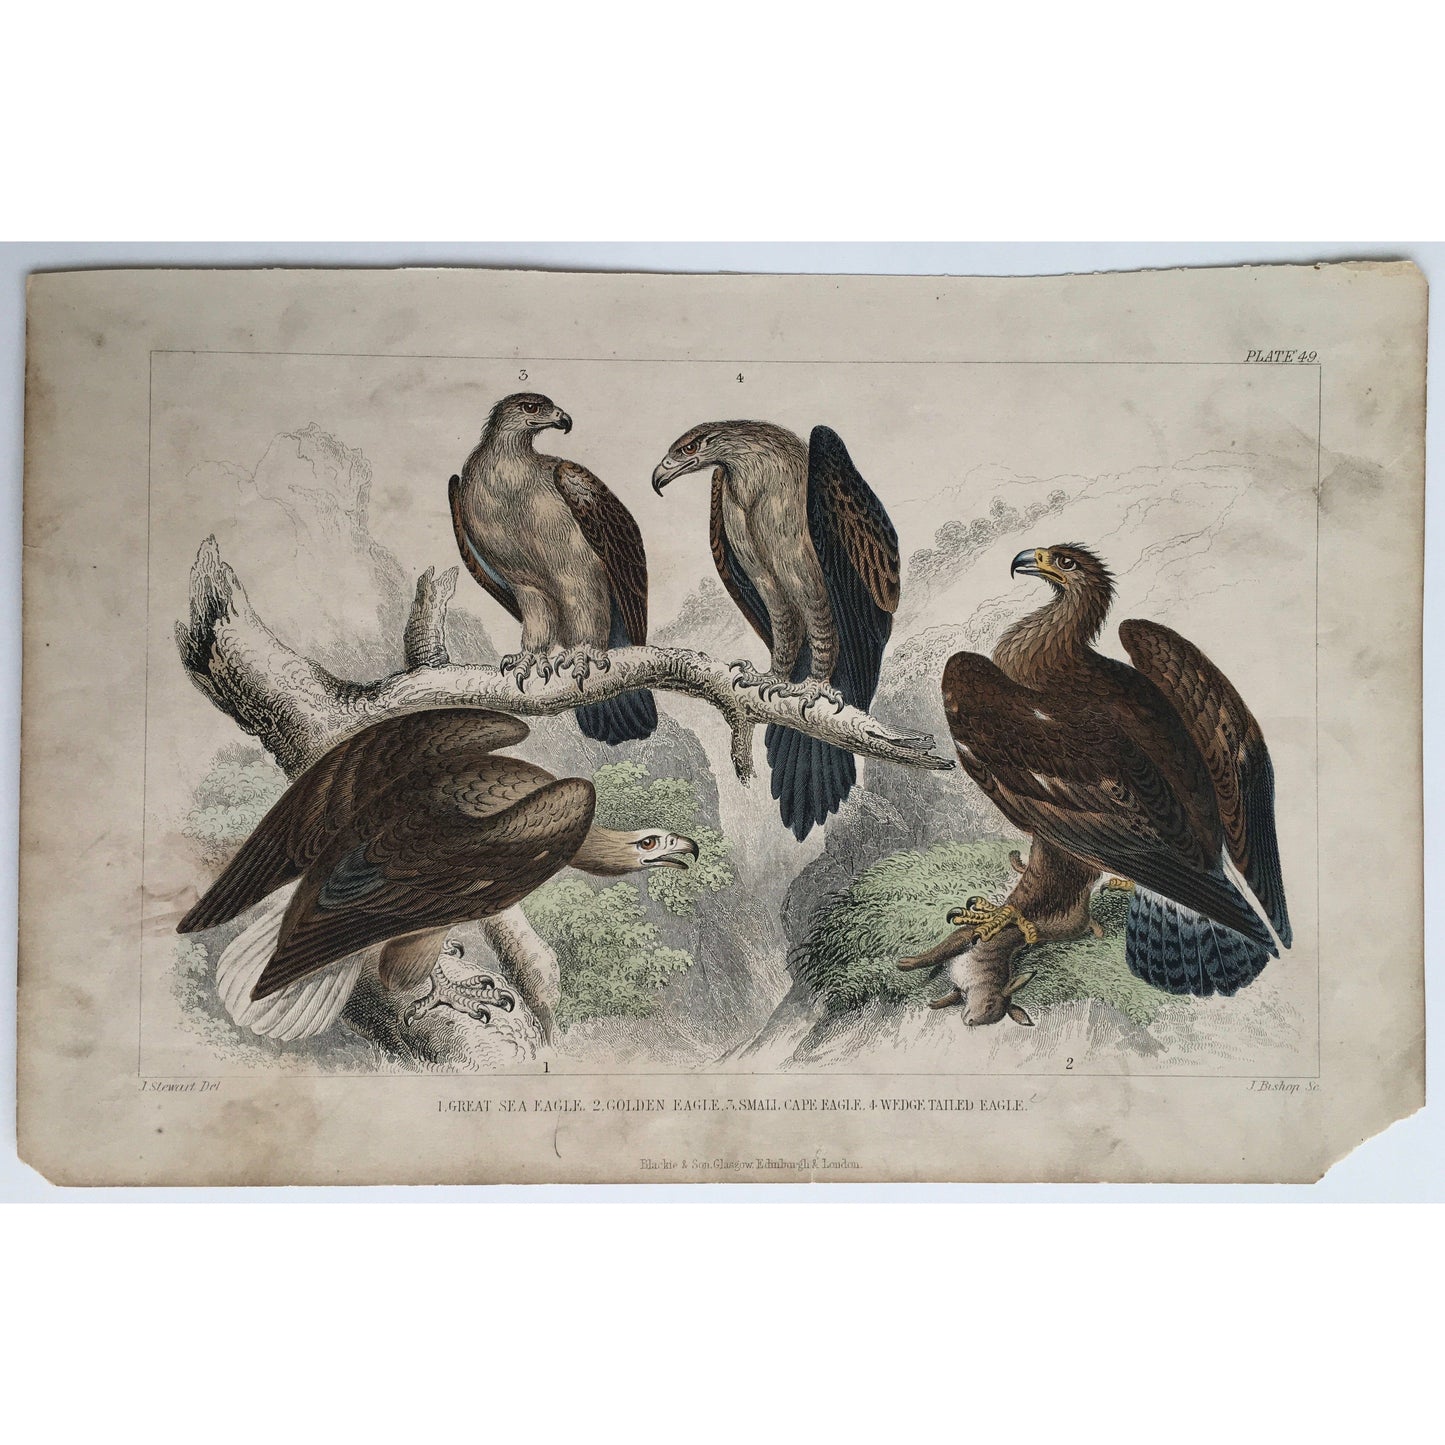 Eagle, Eagles, Great Sea Eagle, Sea Eagle, Golden Eagle, Small Cape Eagle, Cape Eagle, Wedge Tailed Eagle, Bird, Birds, Ornithology, Oliver Goldsmith, Goldsmith, Natural History, Animals, Wildlife, A History of the Earth and Animated Nature, Nature, Blackie & Son, Blackie and Son, 1852, Coloured Colorful, J. Stewart, J. Bishop, Stewart, Bishop, Antique, Prints, Old Prints, Old Books, Vintage, Original, Home decor, Wall art, Artwork, History,